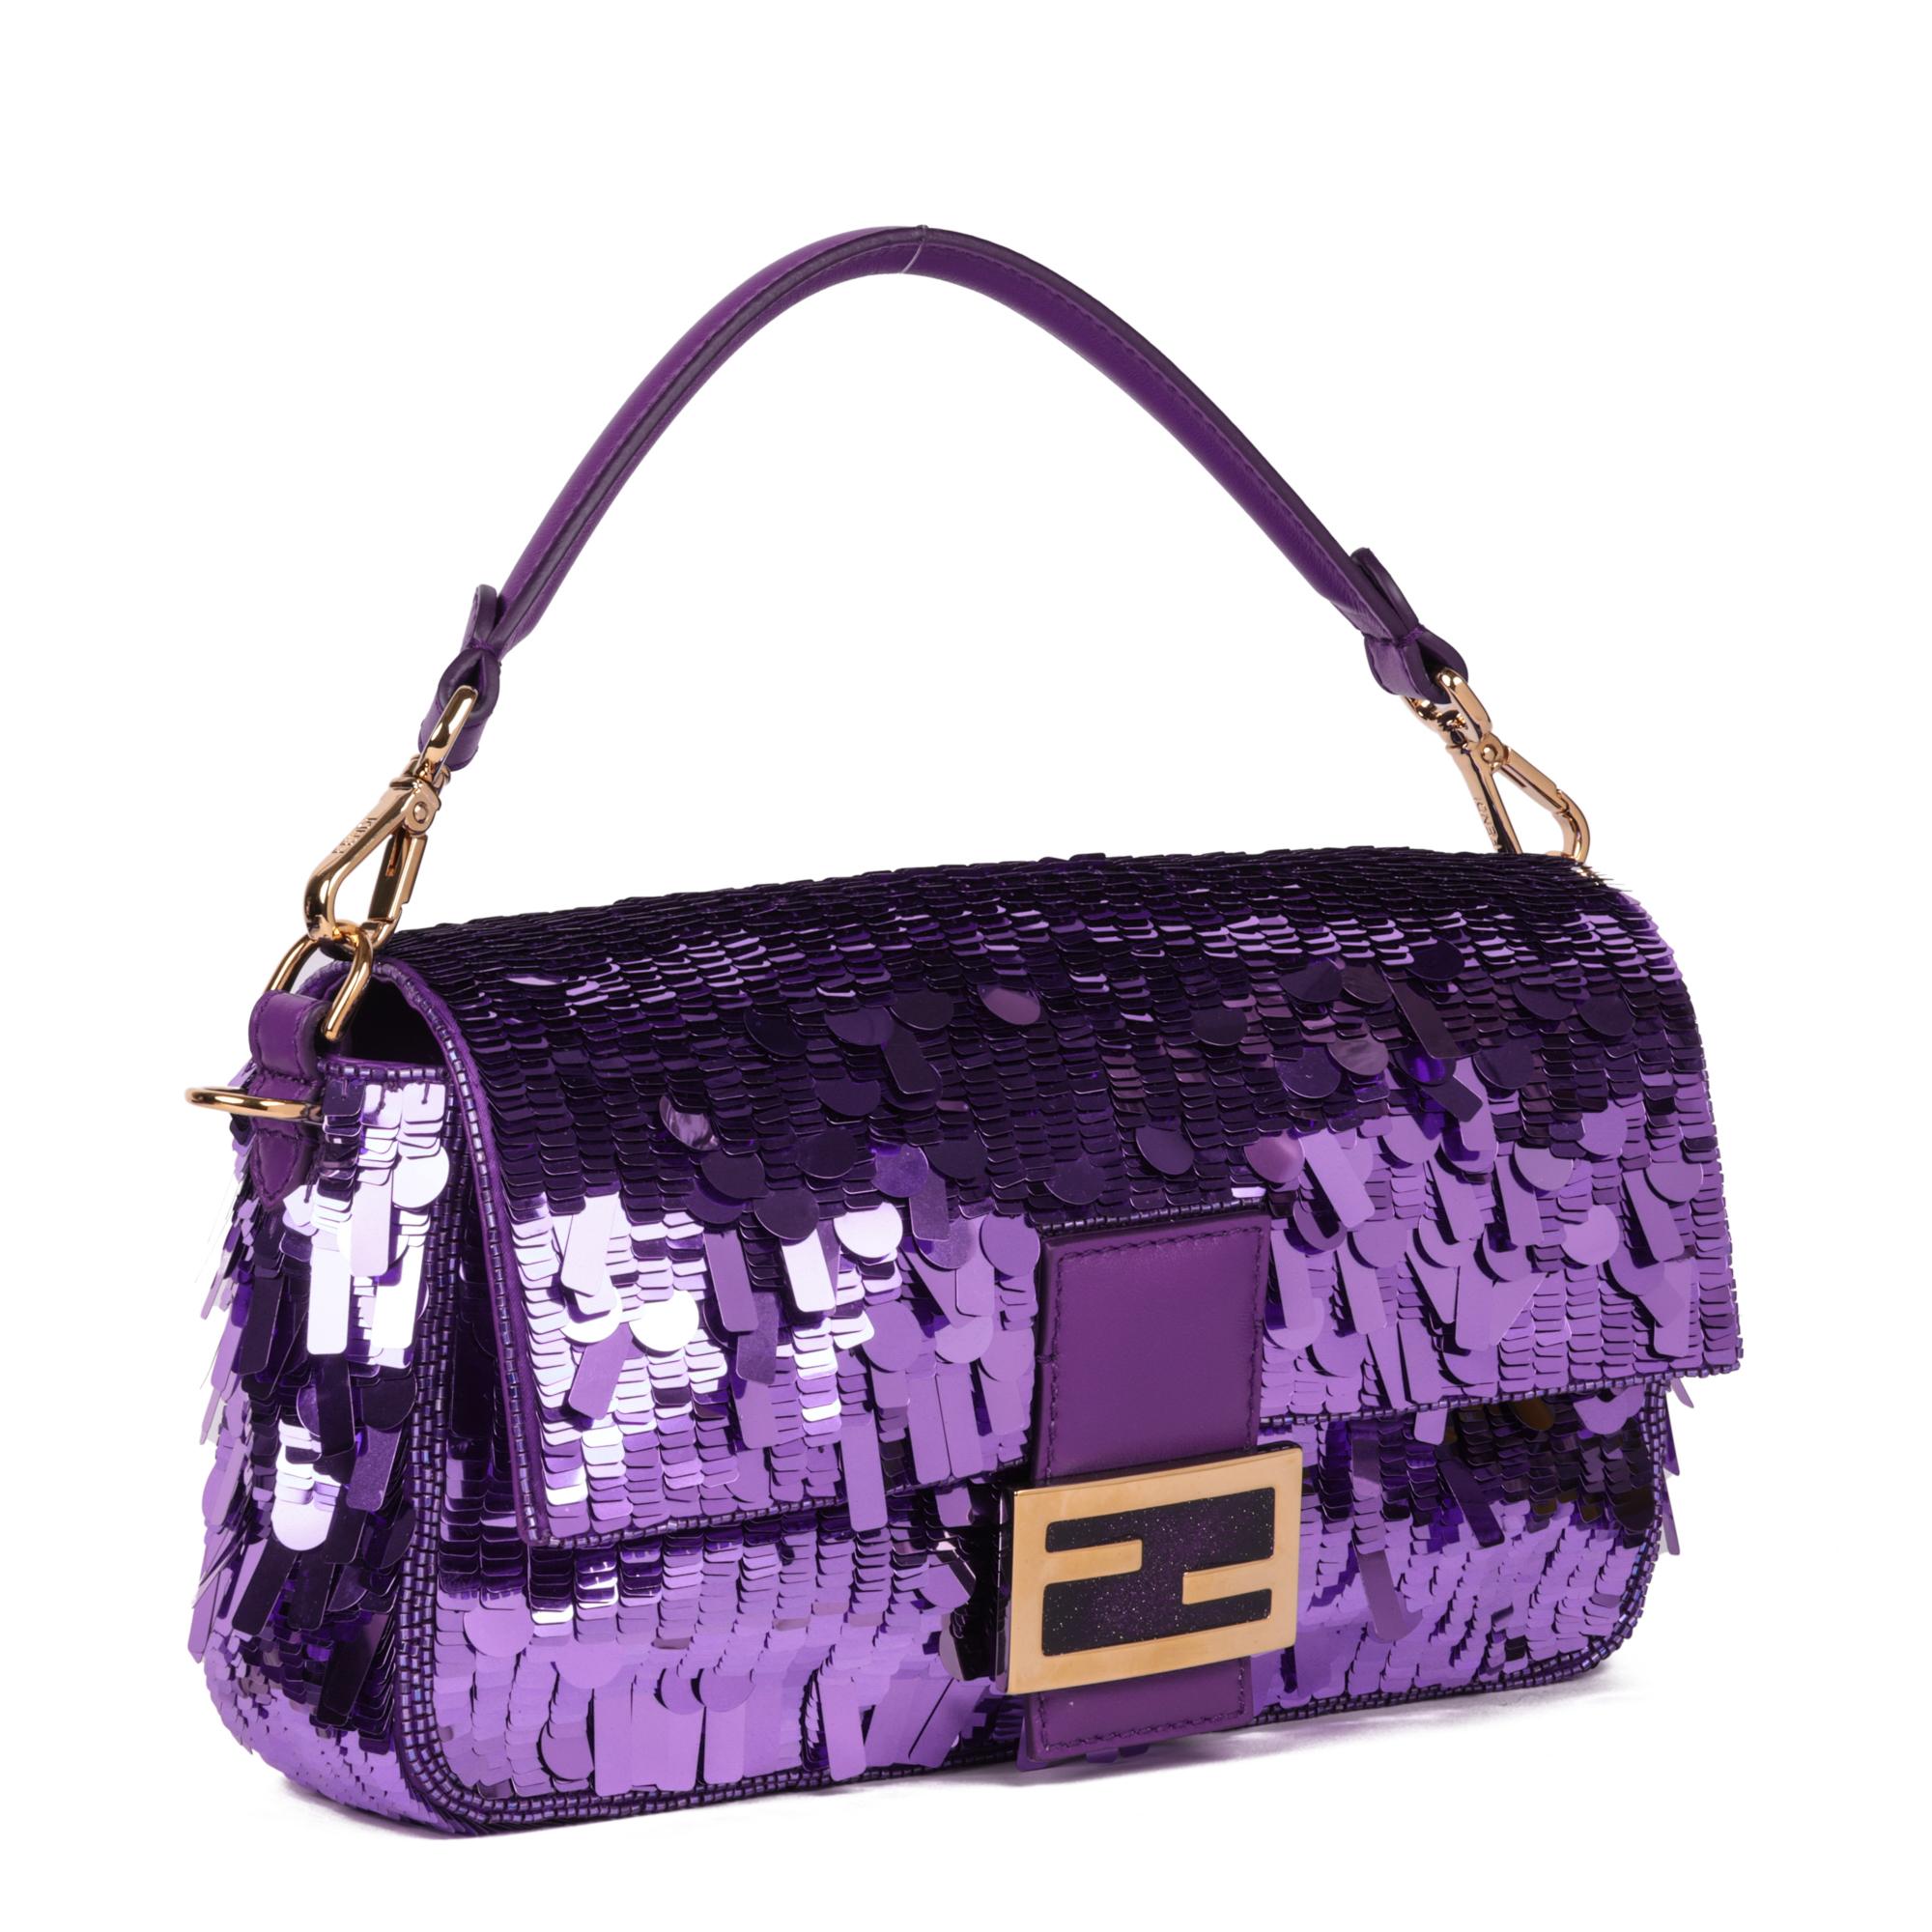 Fendi Purple Embellished Sequin & Purple Calfskin Leather Baguette

CONDITION NOTES
The exterior is in exceptional condition with no signs of use.
The interior is in exceptional condition with no signs of use.
The hardware is in exceptional